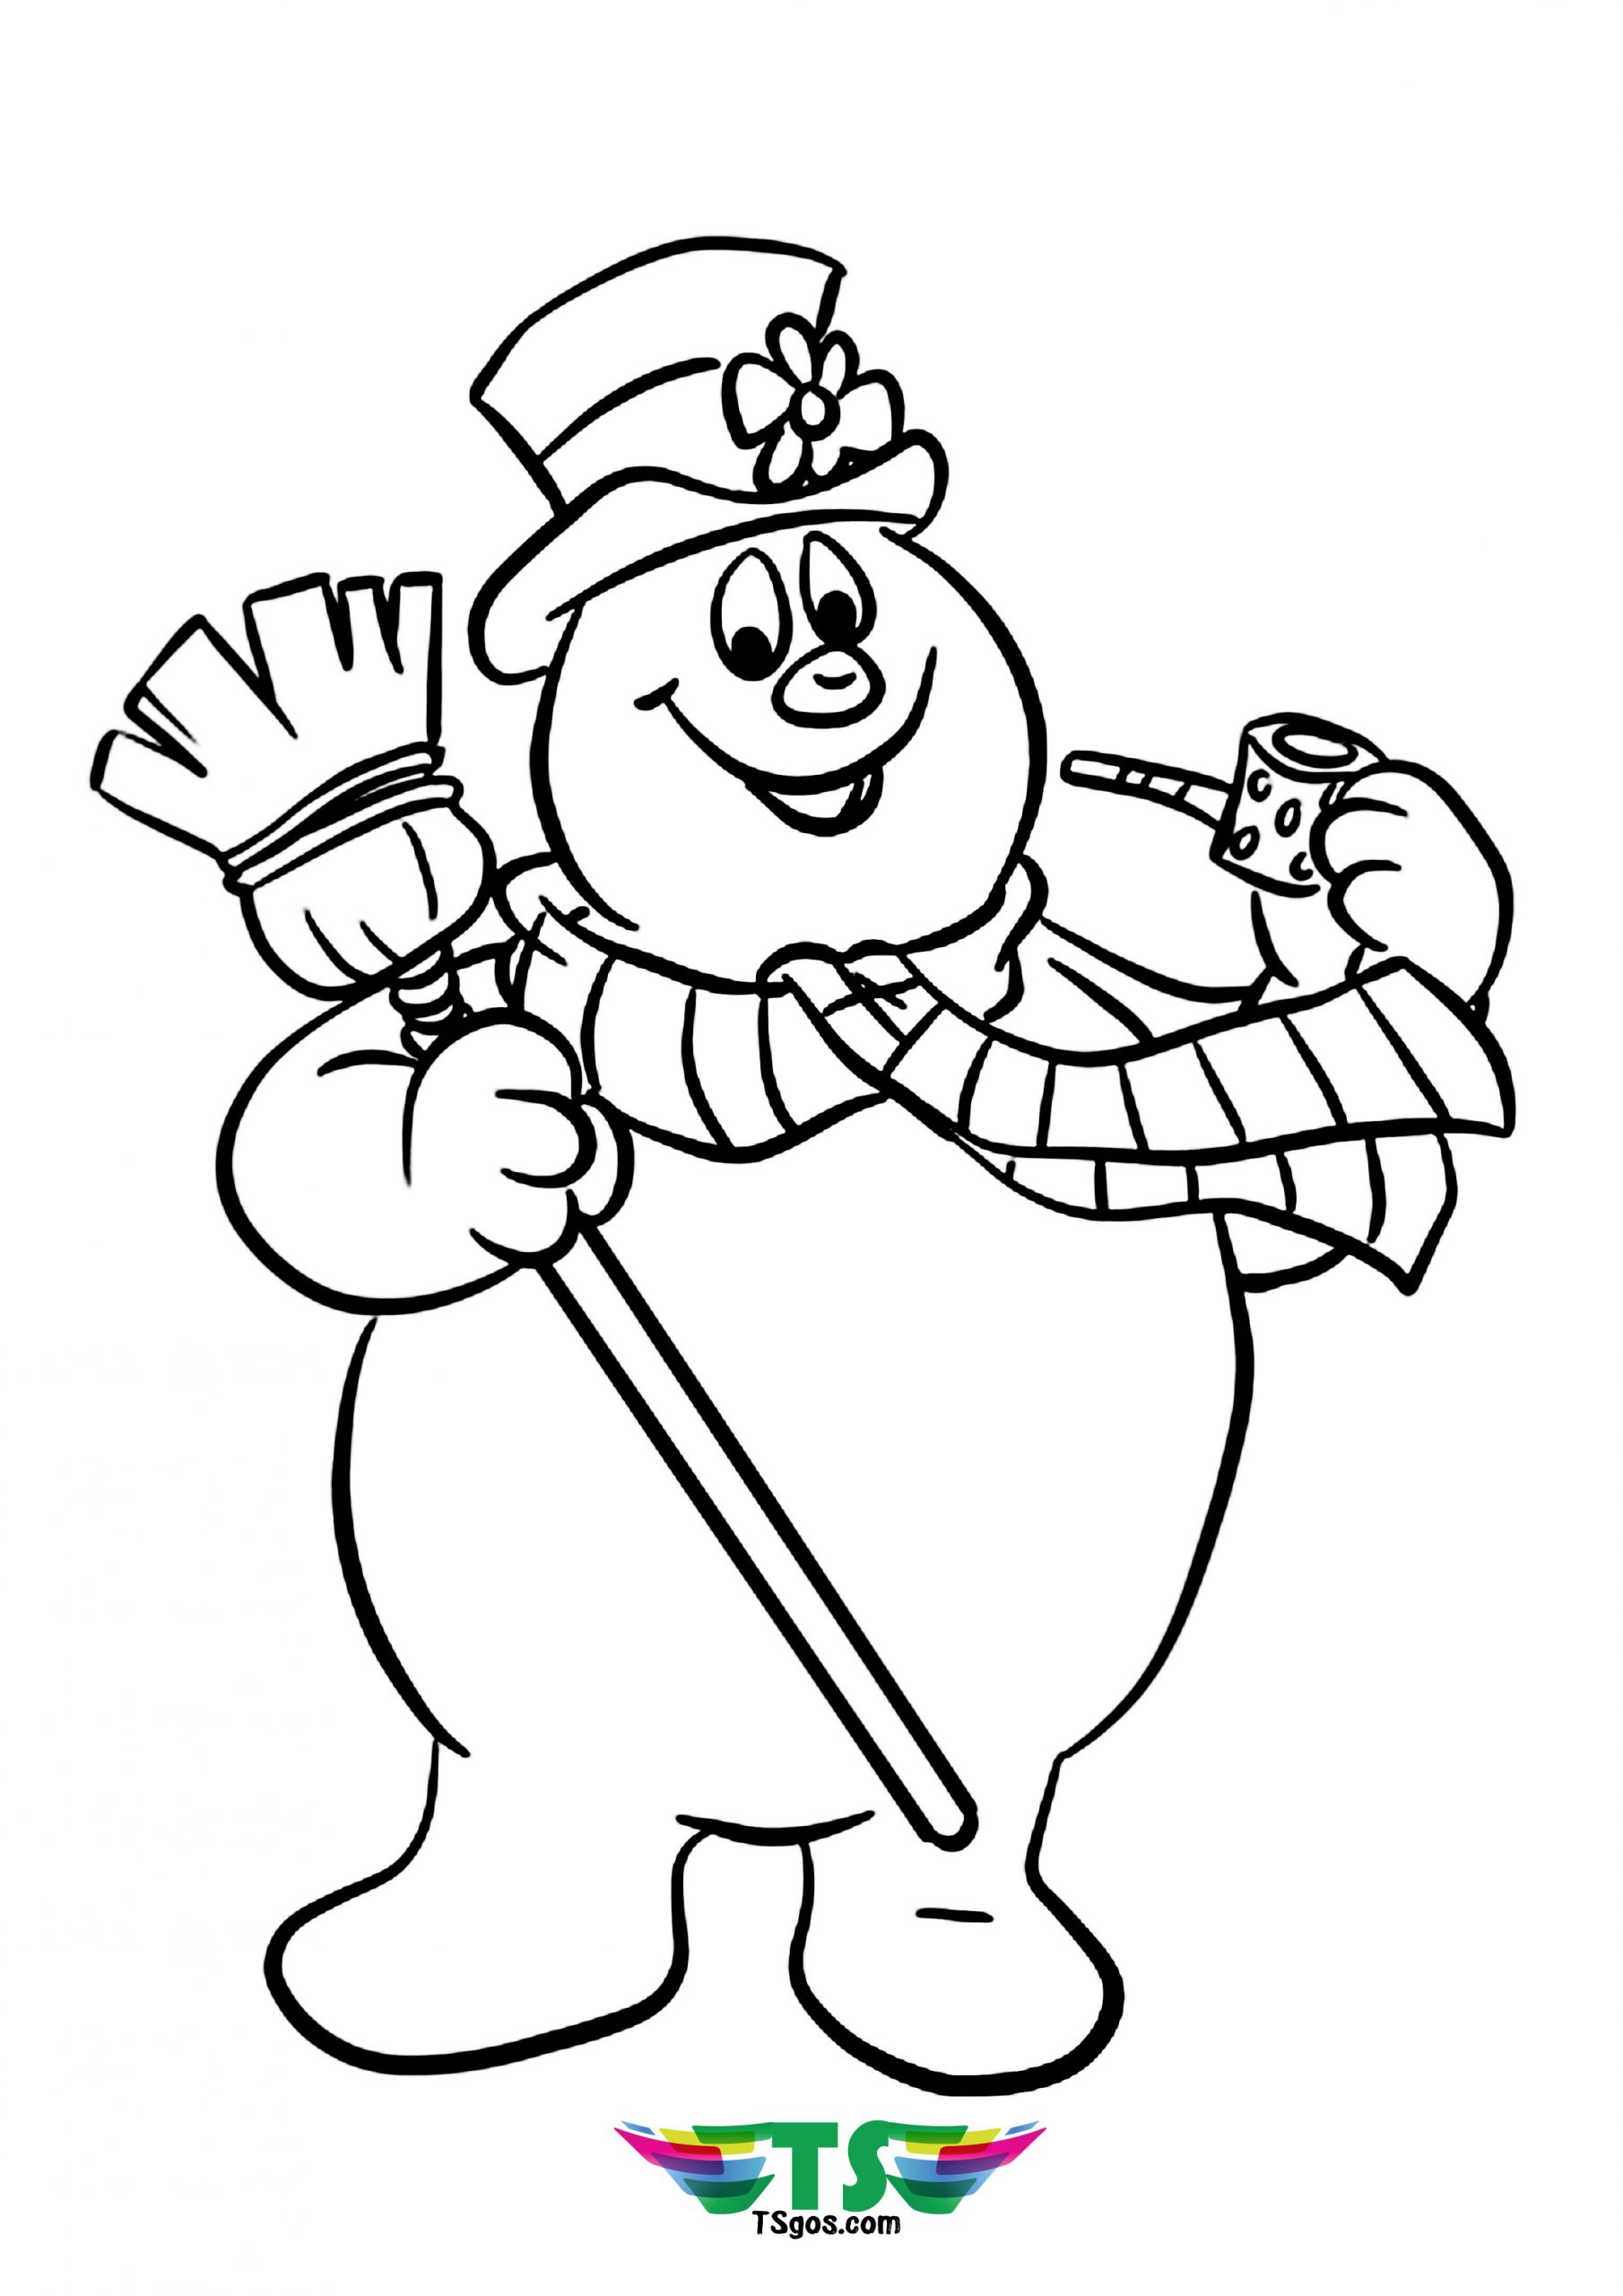 Kids Frosty The Snowman Tsgos Coloring Page